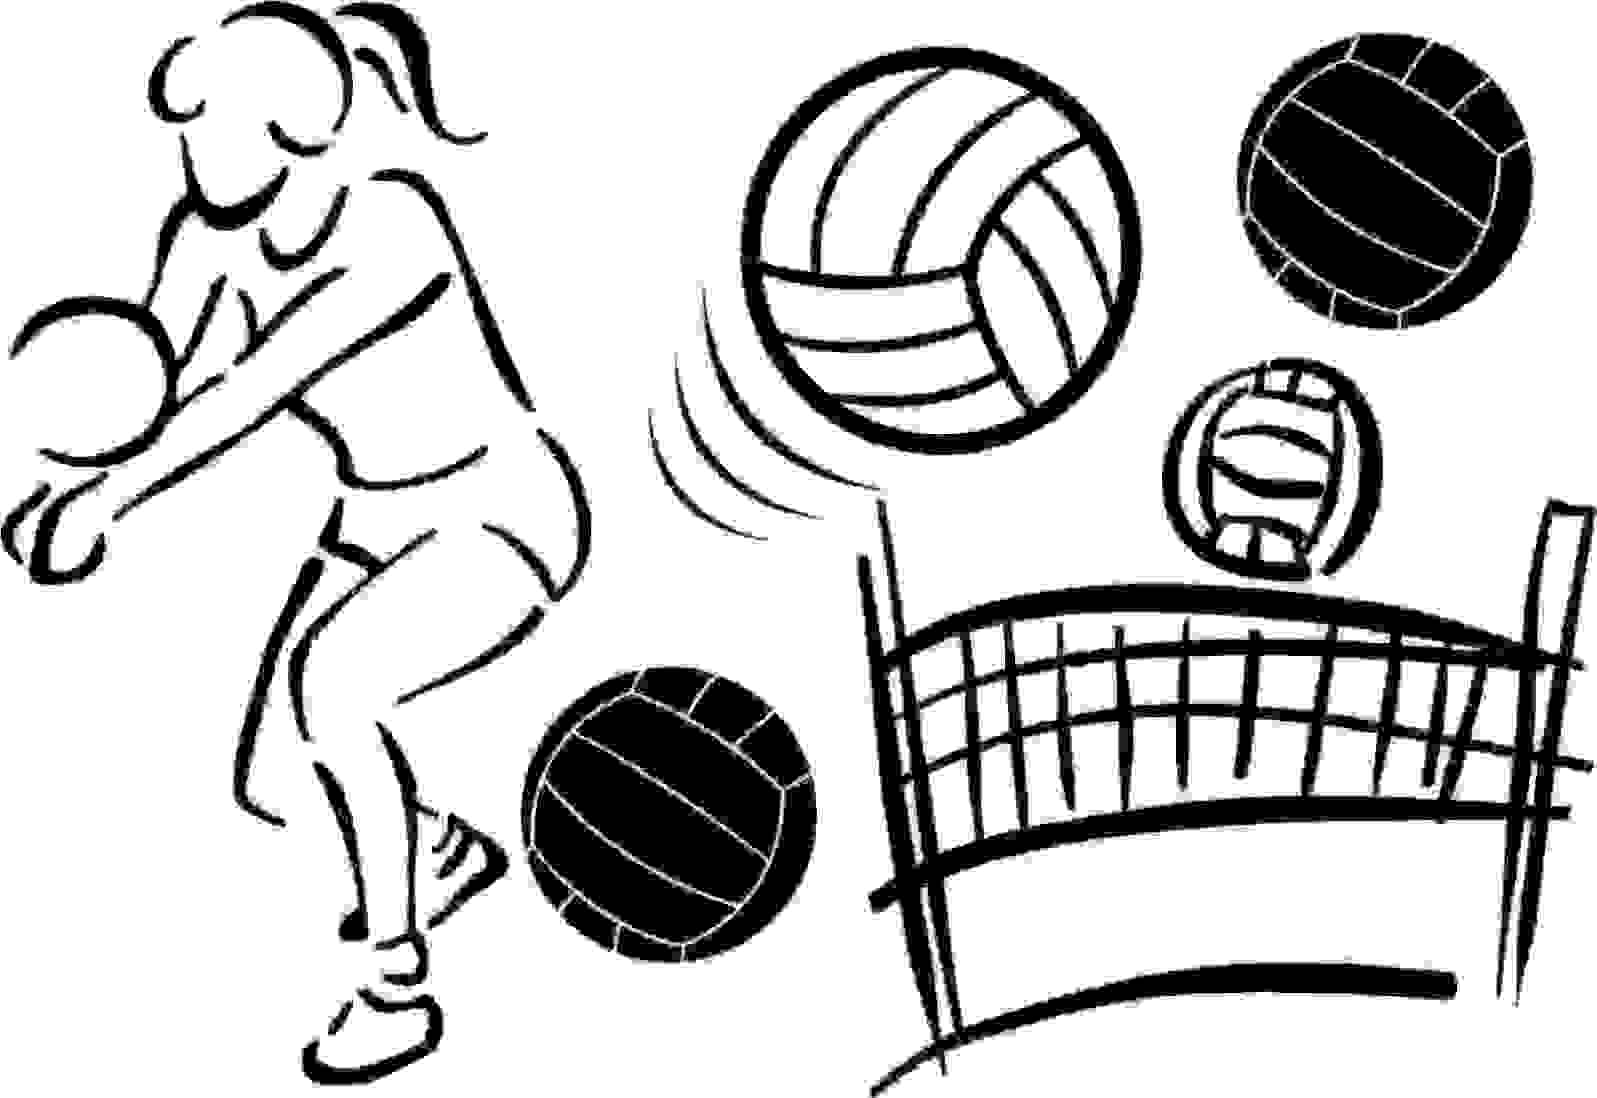 Volleyball Vinyl Wall Decals Pack - Sports Decals - ClipArt Best